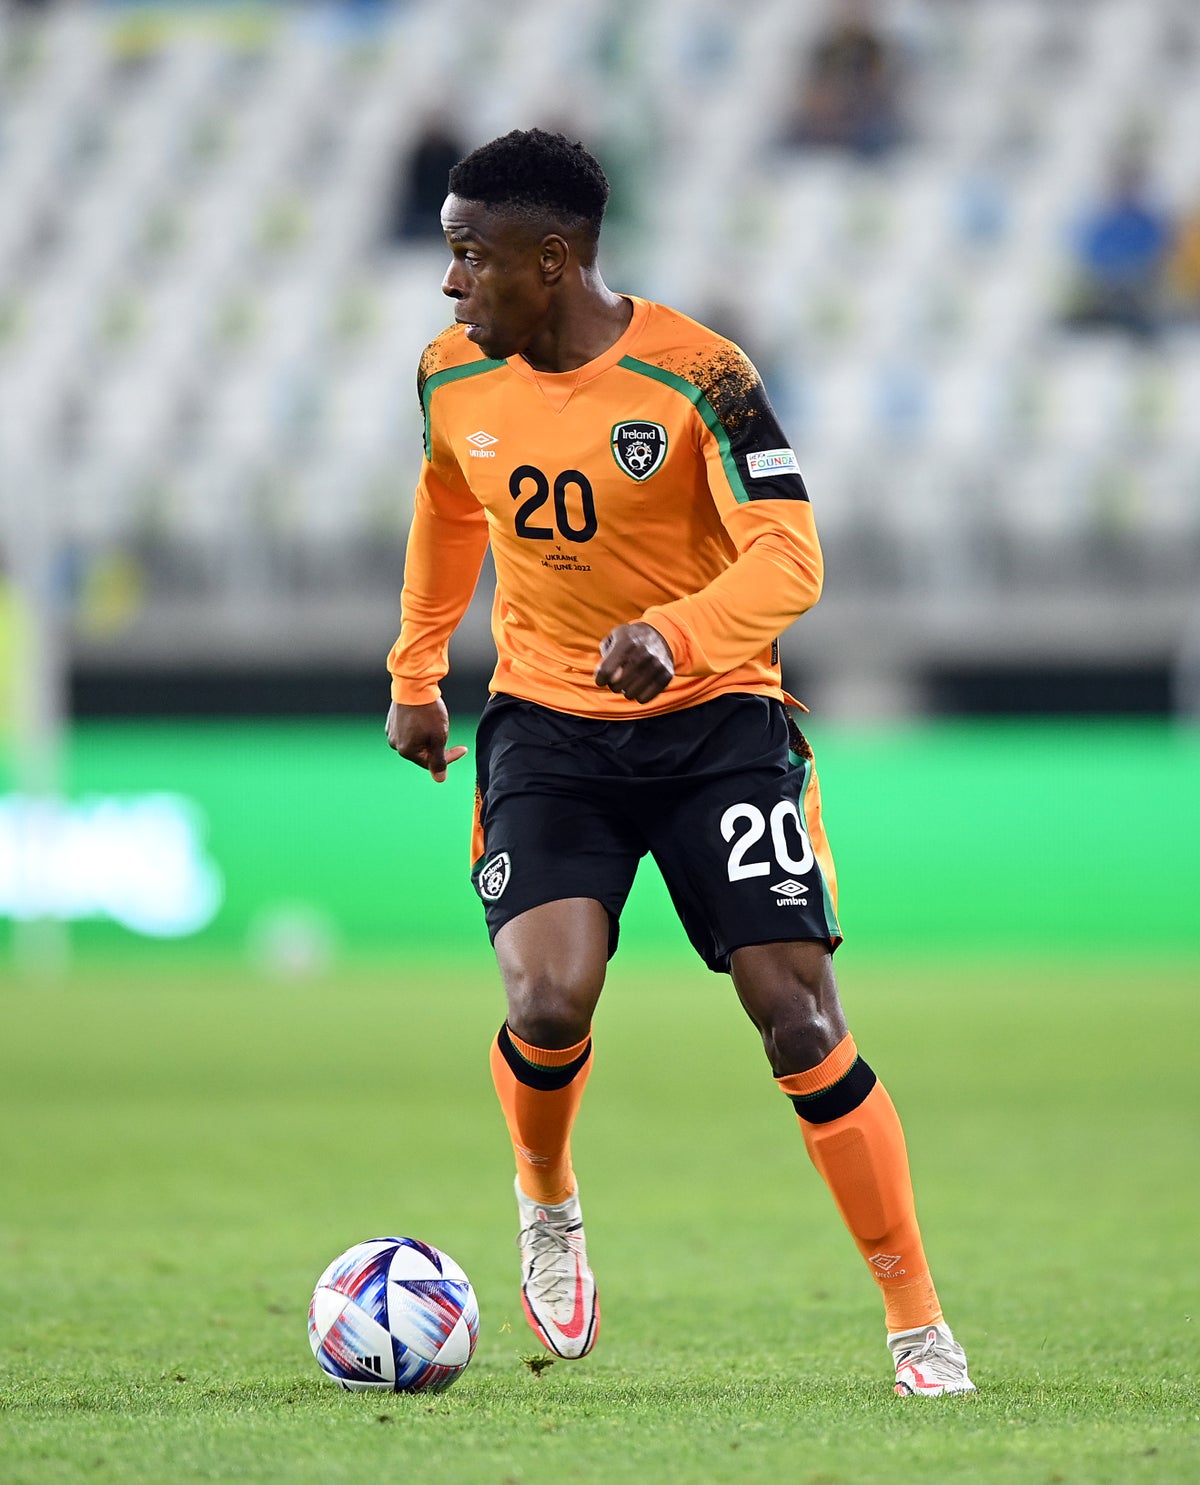 Republic of Ireland’s Chiedozie Ogbene sets sights on reaching Premier League